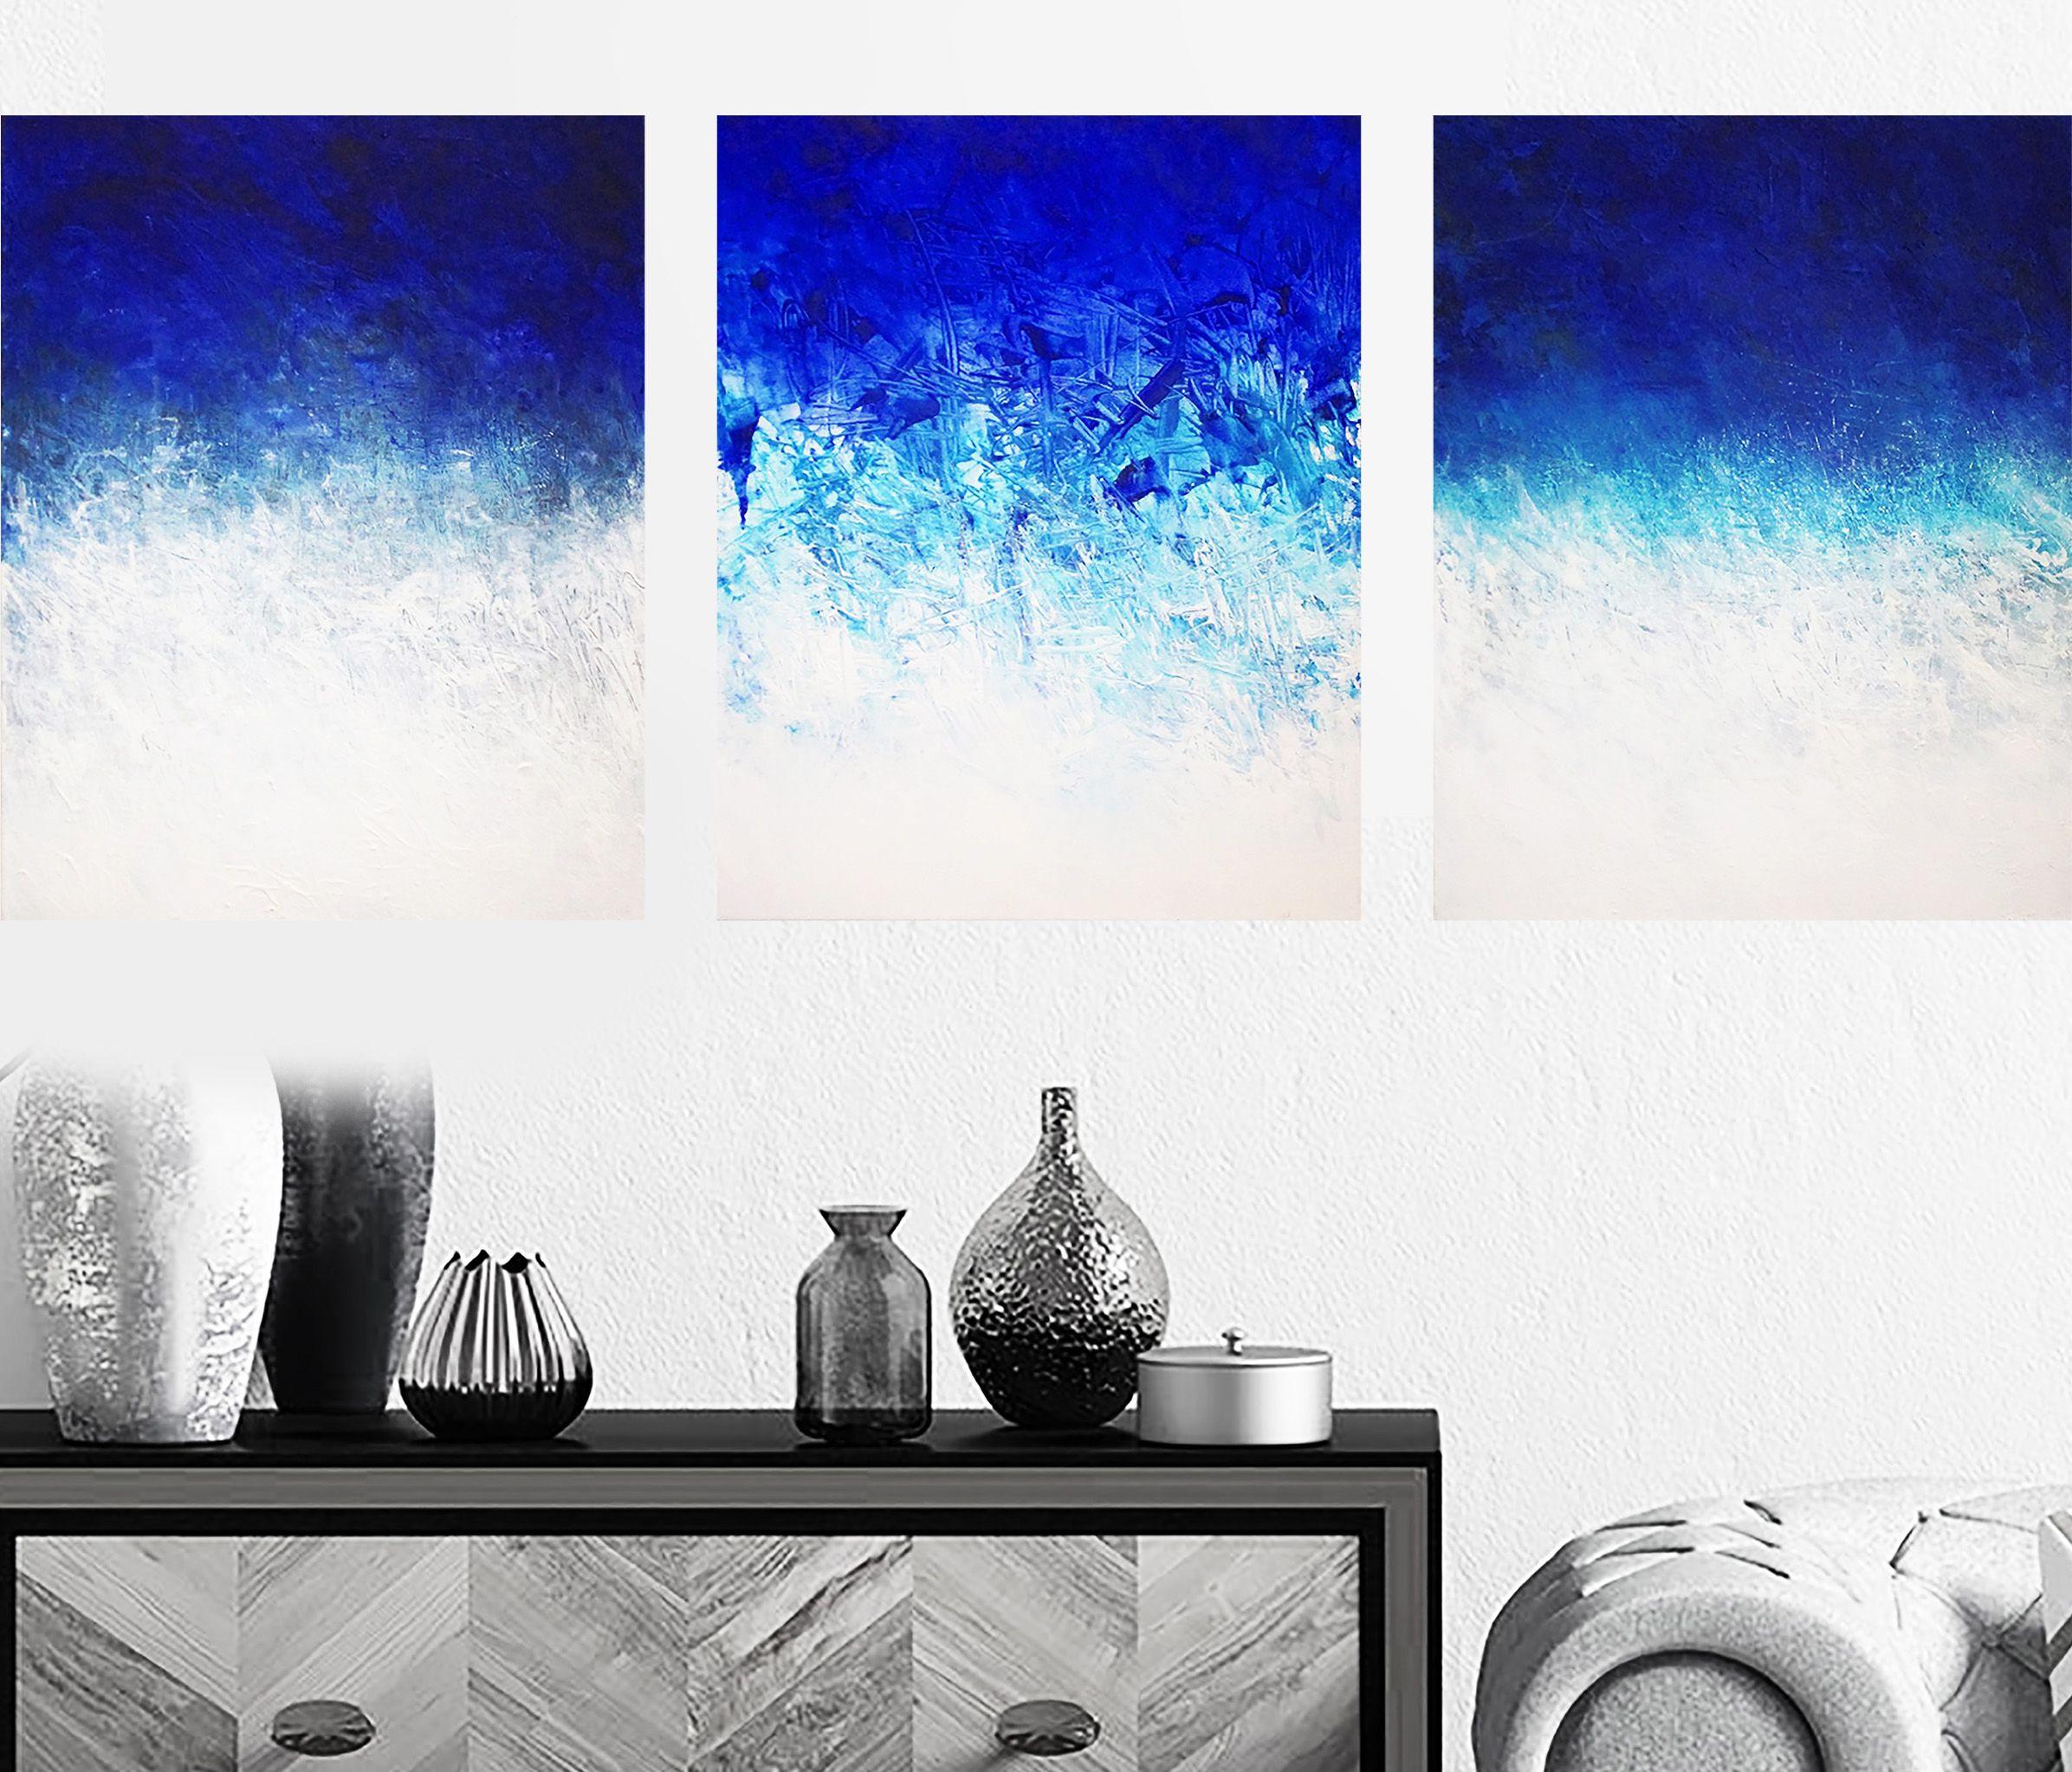 The paintings that I create are meant to inspire and uplift, as well as enhance your interiors. I believe that our homes should be sanctuaries that surrounds us with comfort, color, beauty and the things we love. If you feel an emotional connection